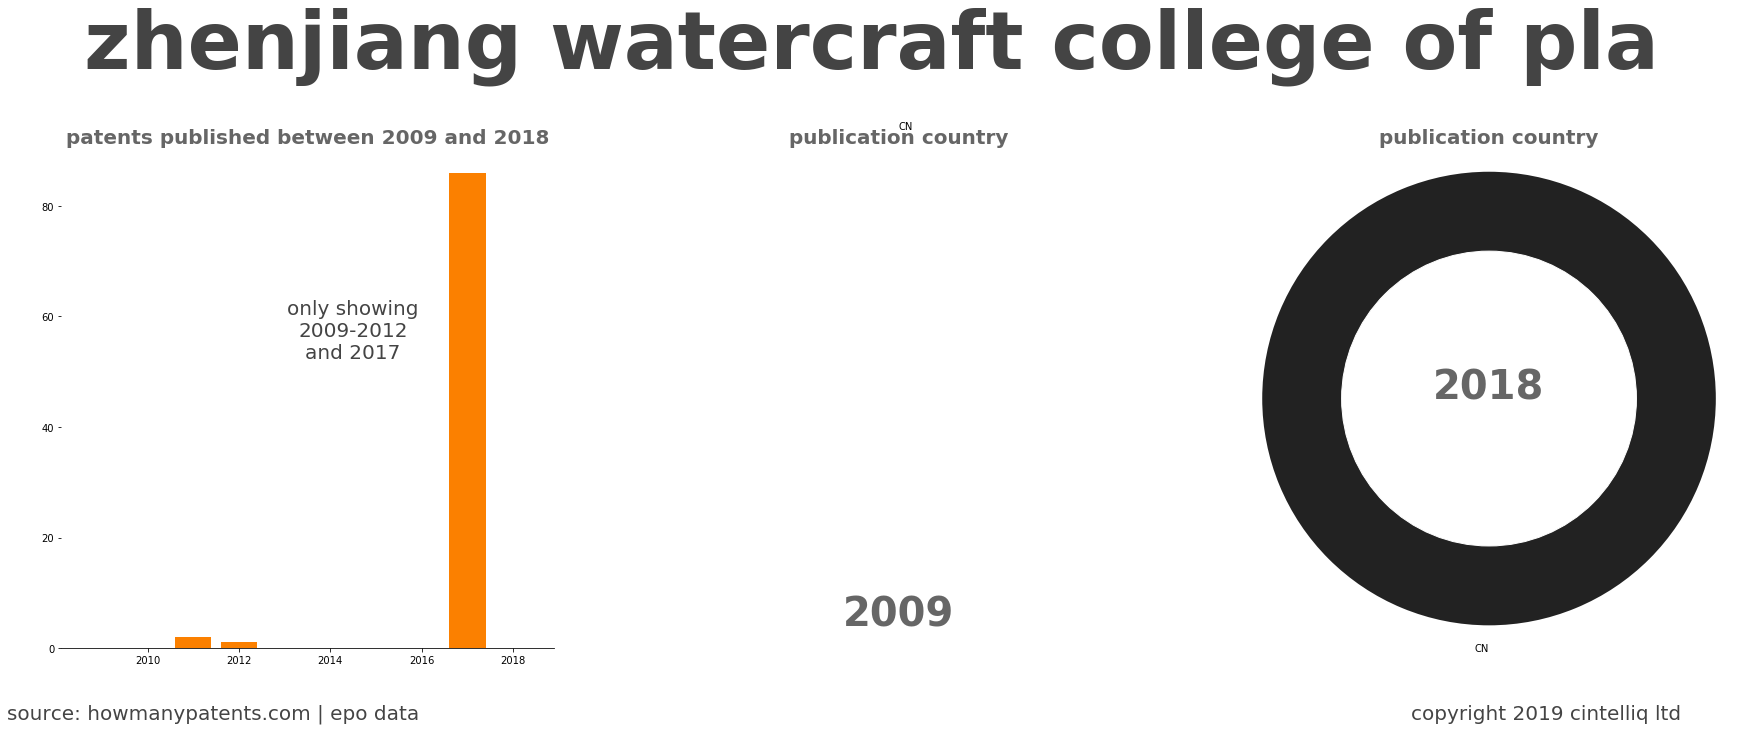 summary of patents for Zhenjiang Watercraft College Of Pla